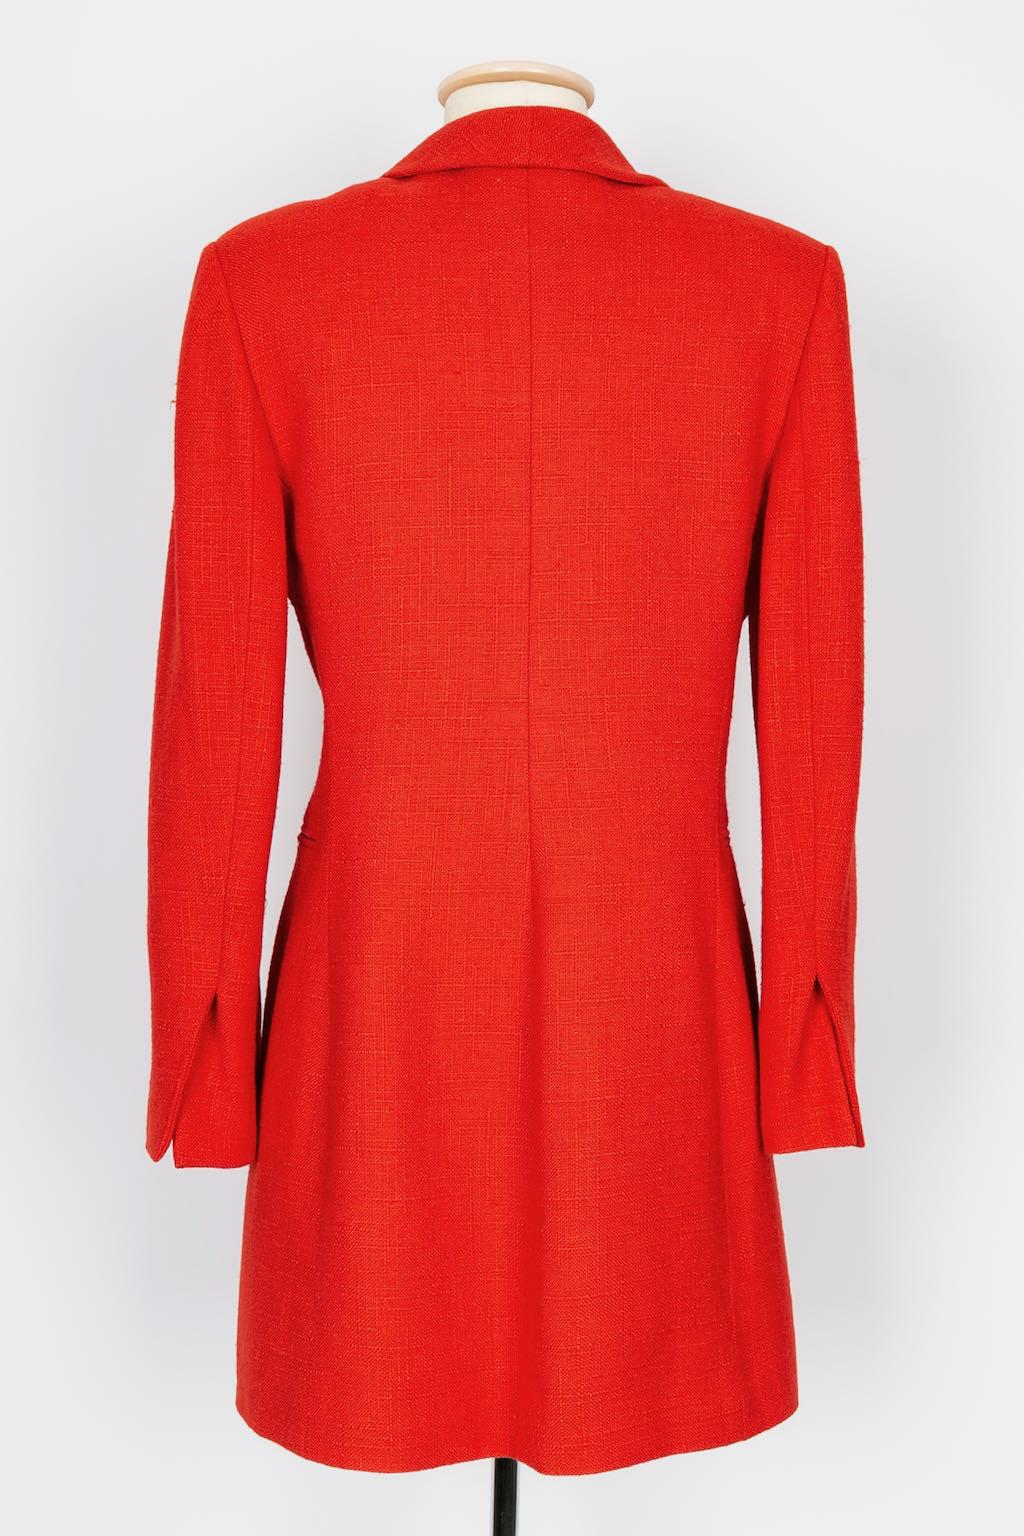 Christian Dior Red Linen and Cotton Three-Piece Set For Sale 10